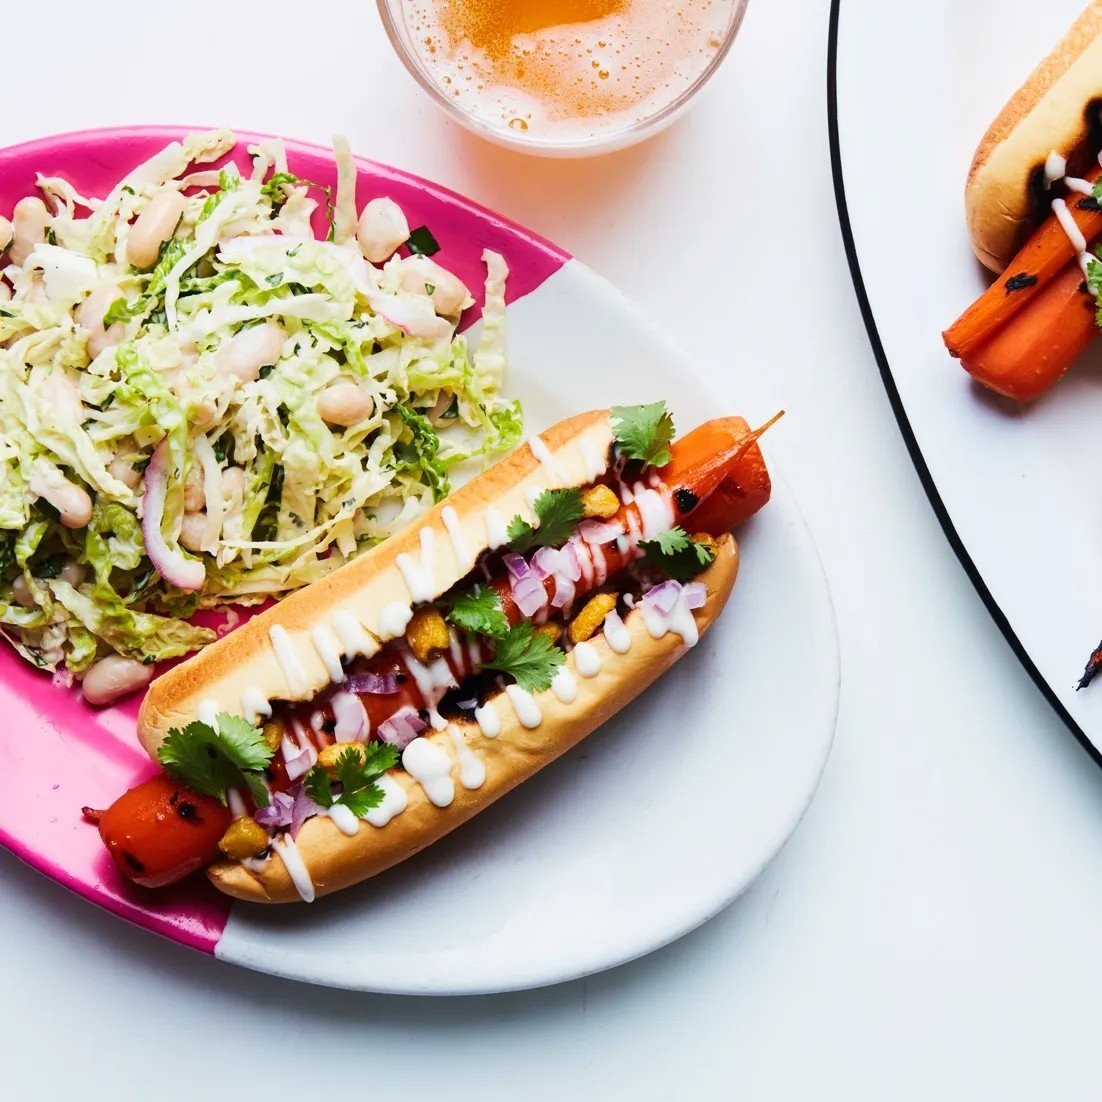 grilled-carrot-dog-with-cilantro-slaw-recipe-02062017.jpg